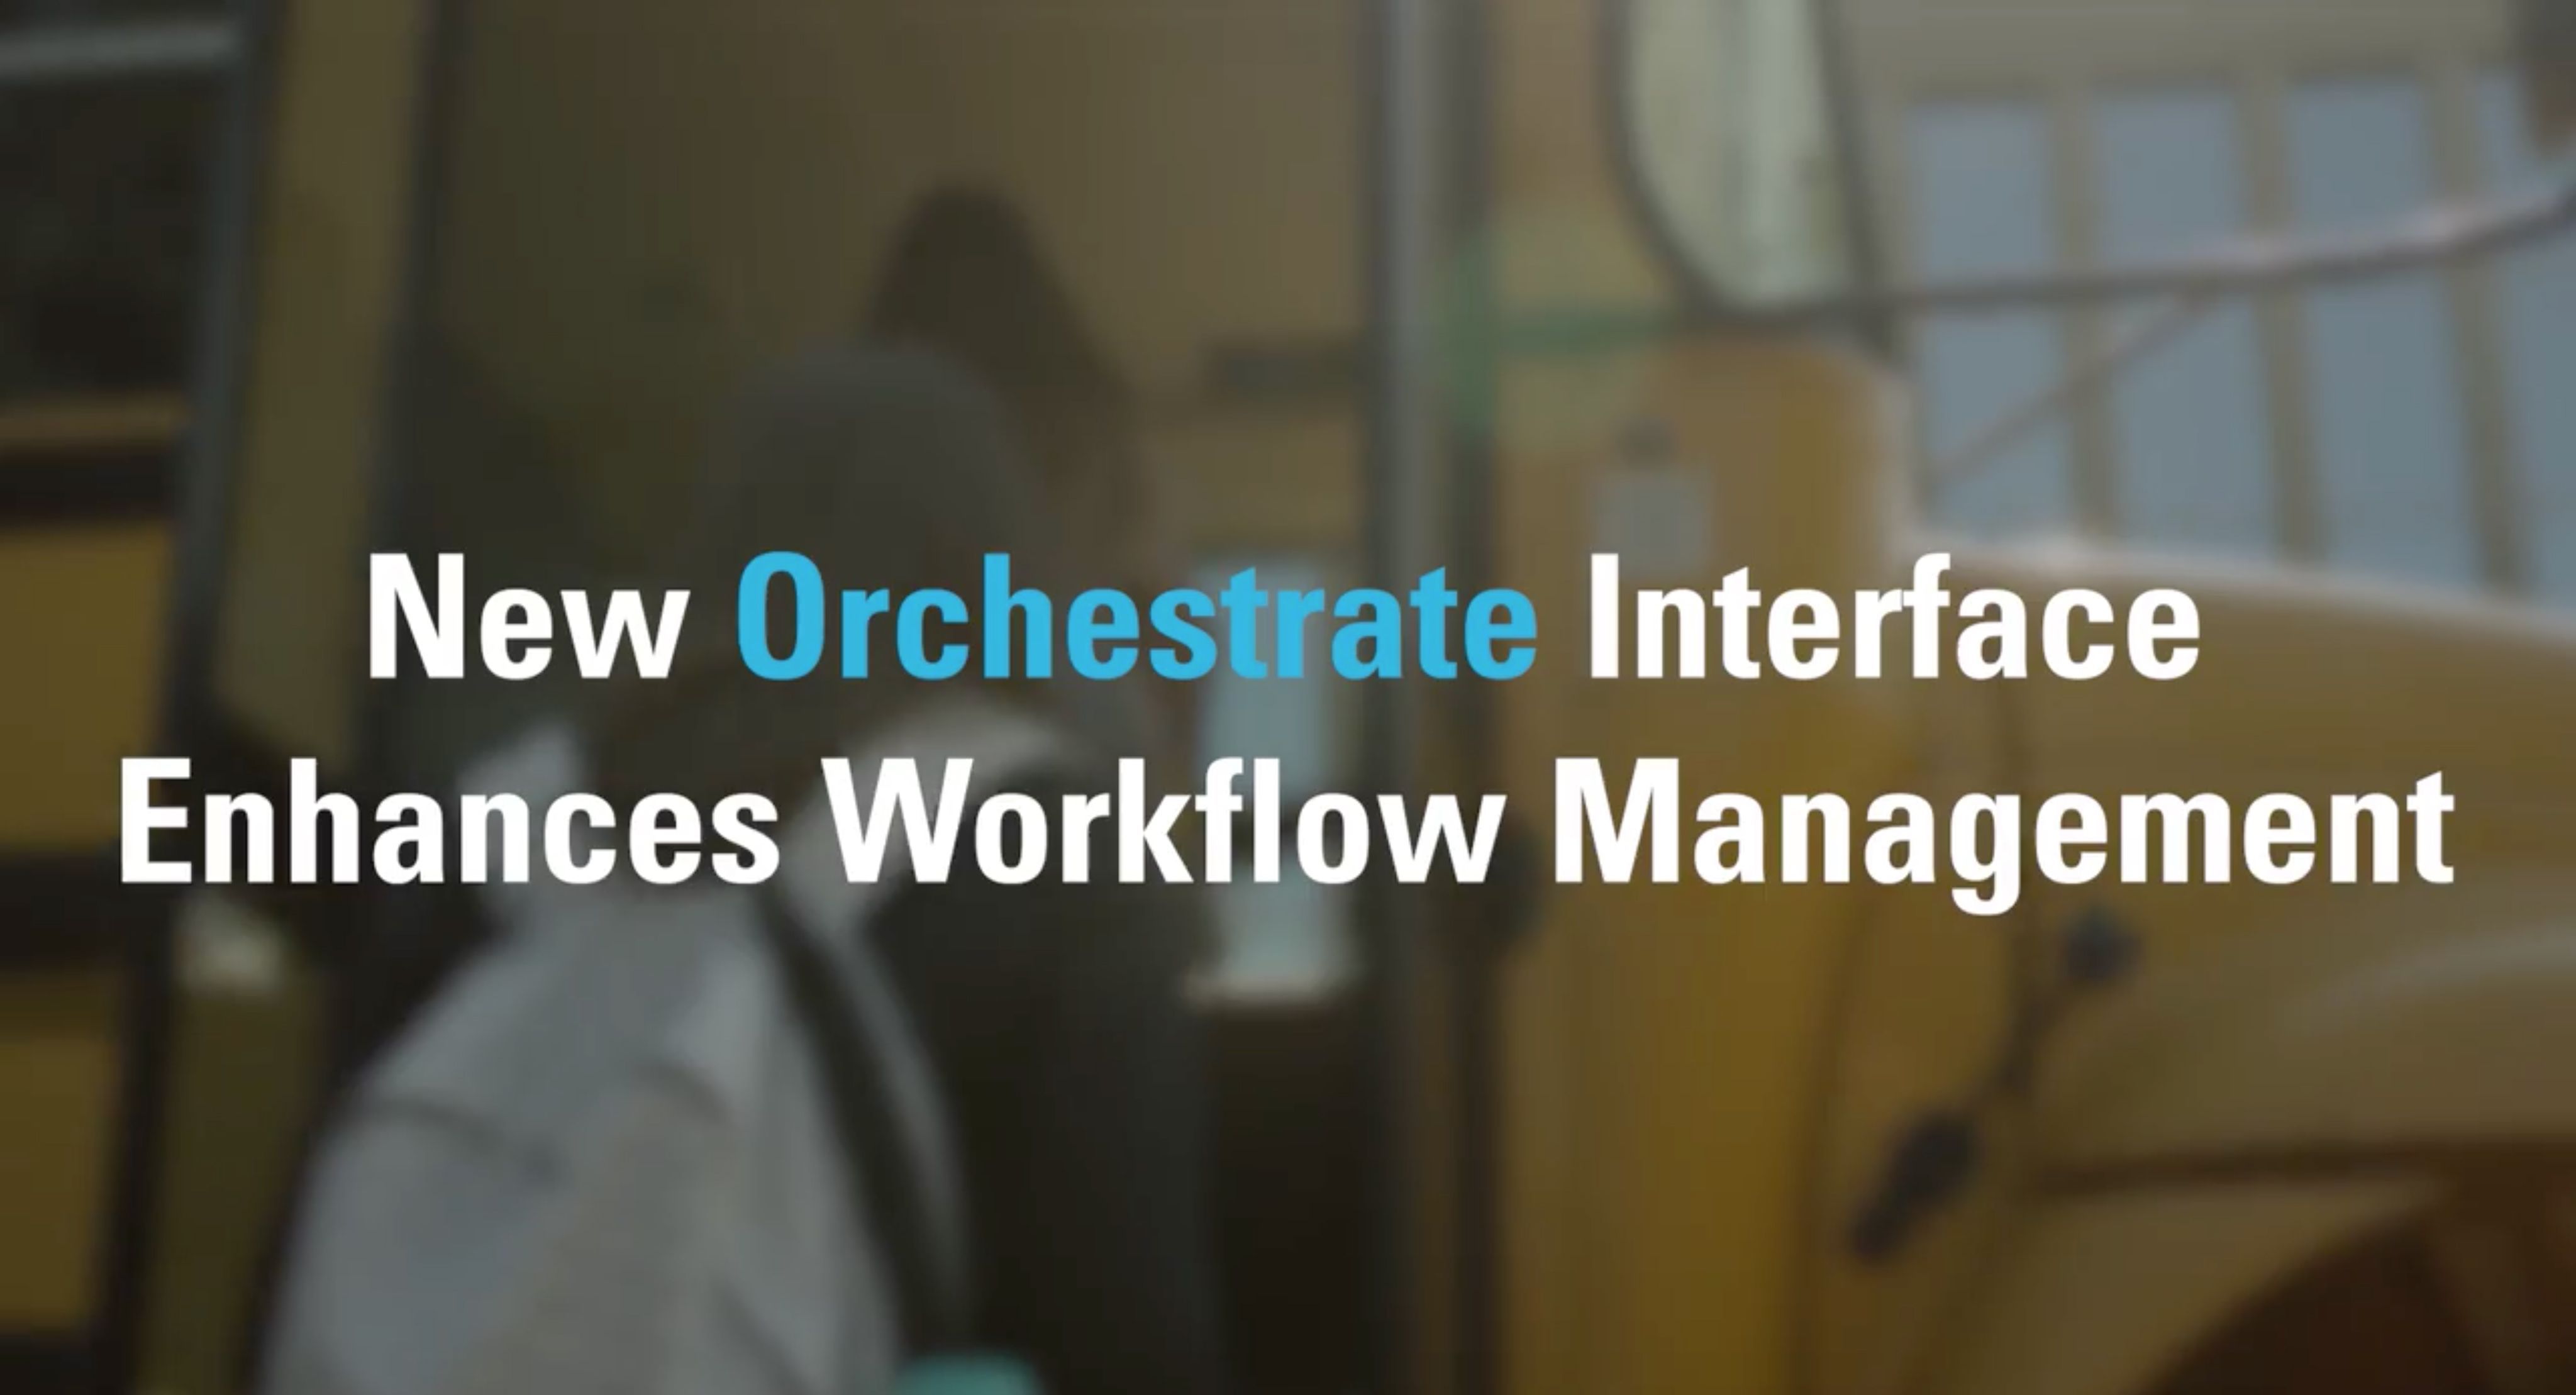 New Orchestrate Interface Enhances Workflow Management Video